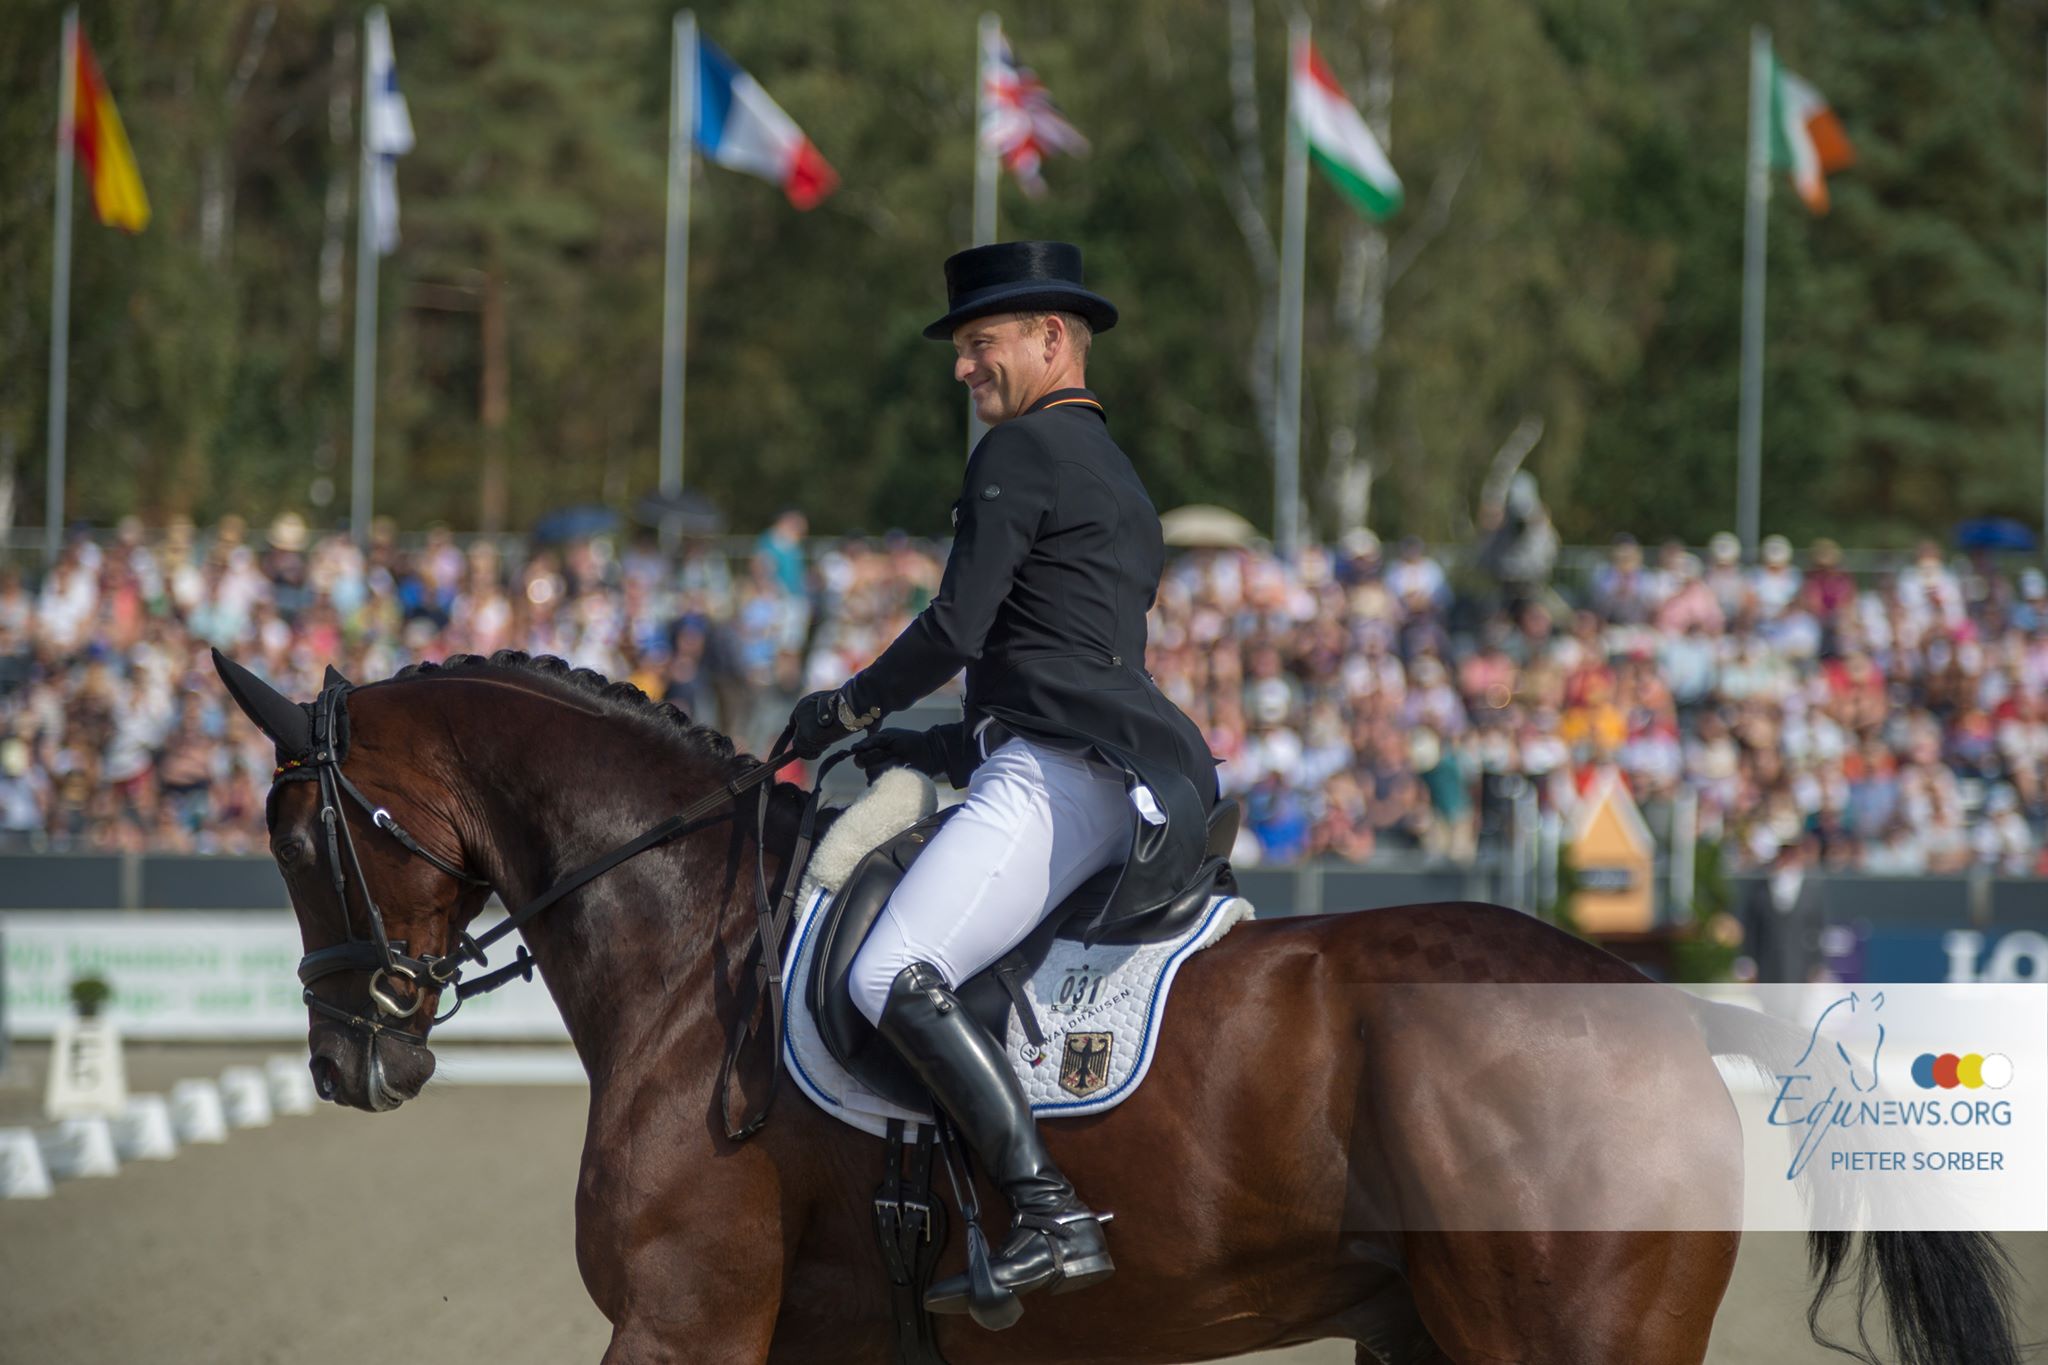 Germany takes the lead in current Eventing EC leaderboard